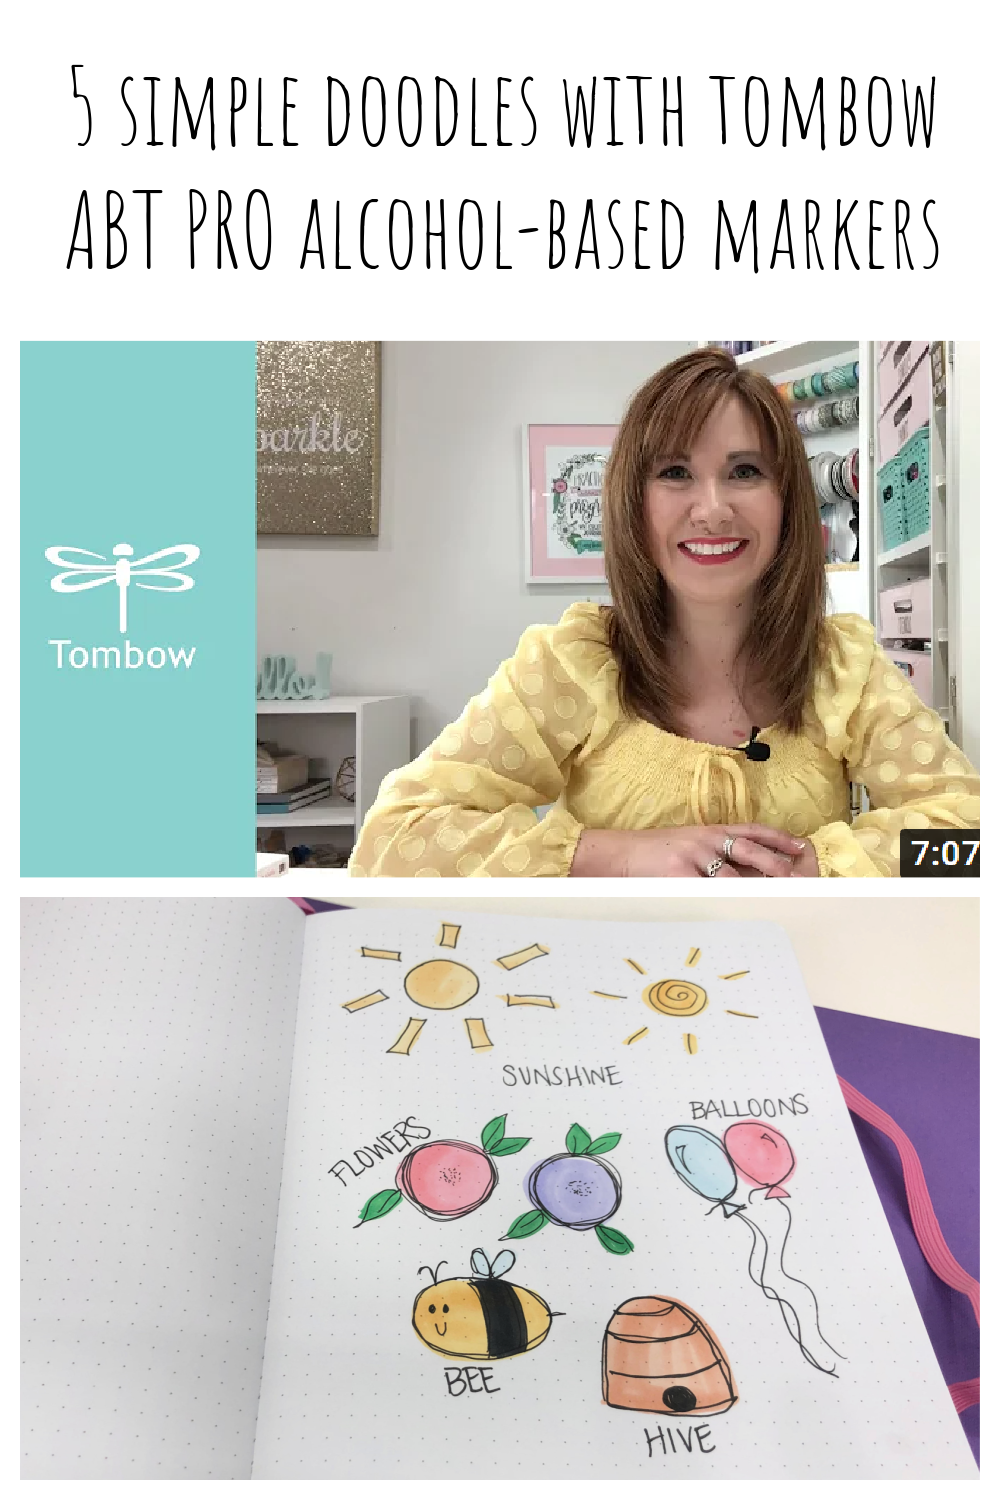 Image is a collage designed for Pinterest that includes a photo of Amy wearing a yellow shirt, the Tombow company logo, and the sketchbook page with five different doodle ideas.